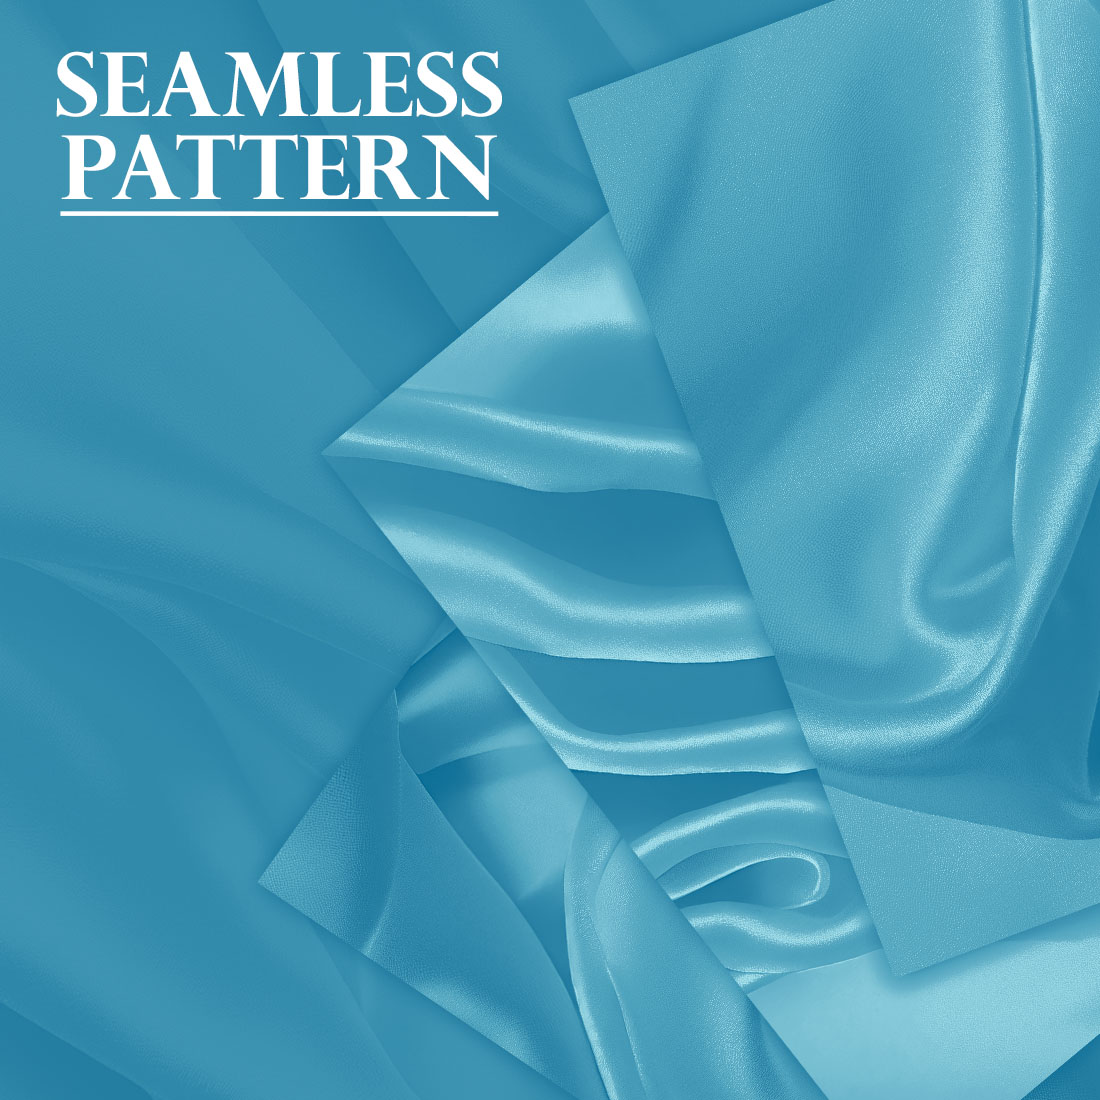 Set of images with beautiful patterns of blue sea silk.